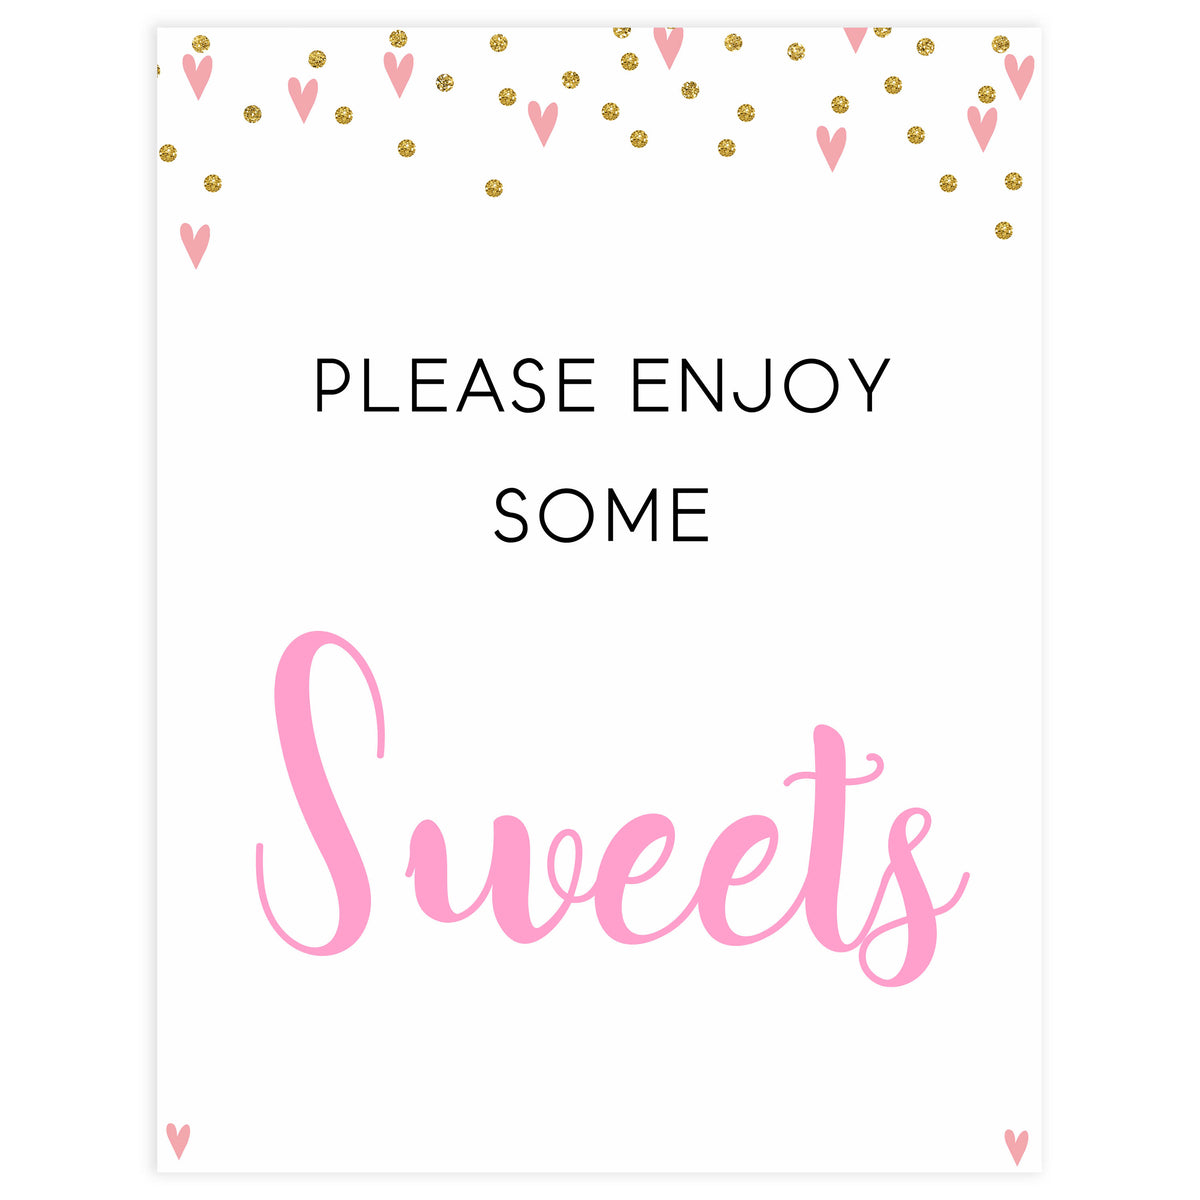 sweets baby shower table signs, sweets baby signs, Pink hearts baby decor, printable baby table signs, printable baby decor, gold glitter table signs, fun baby signs, pink hearts fun baby table signs